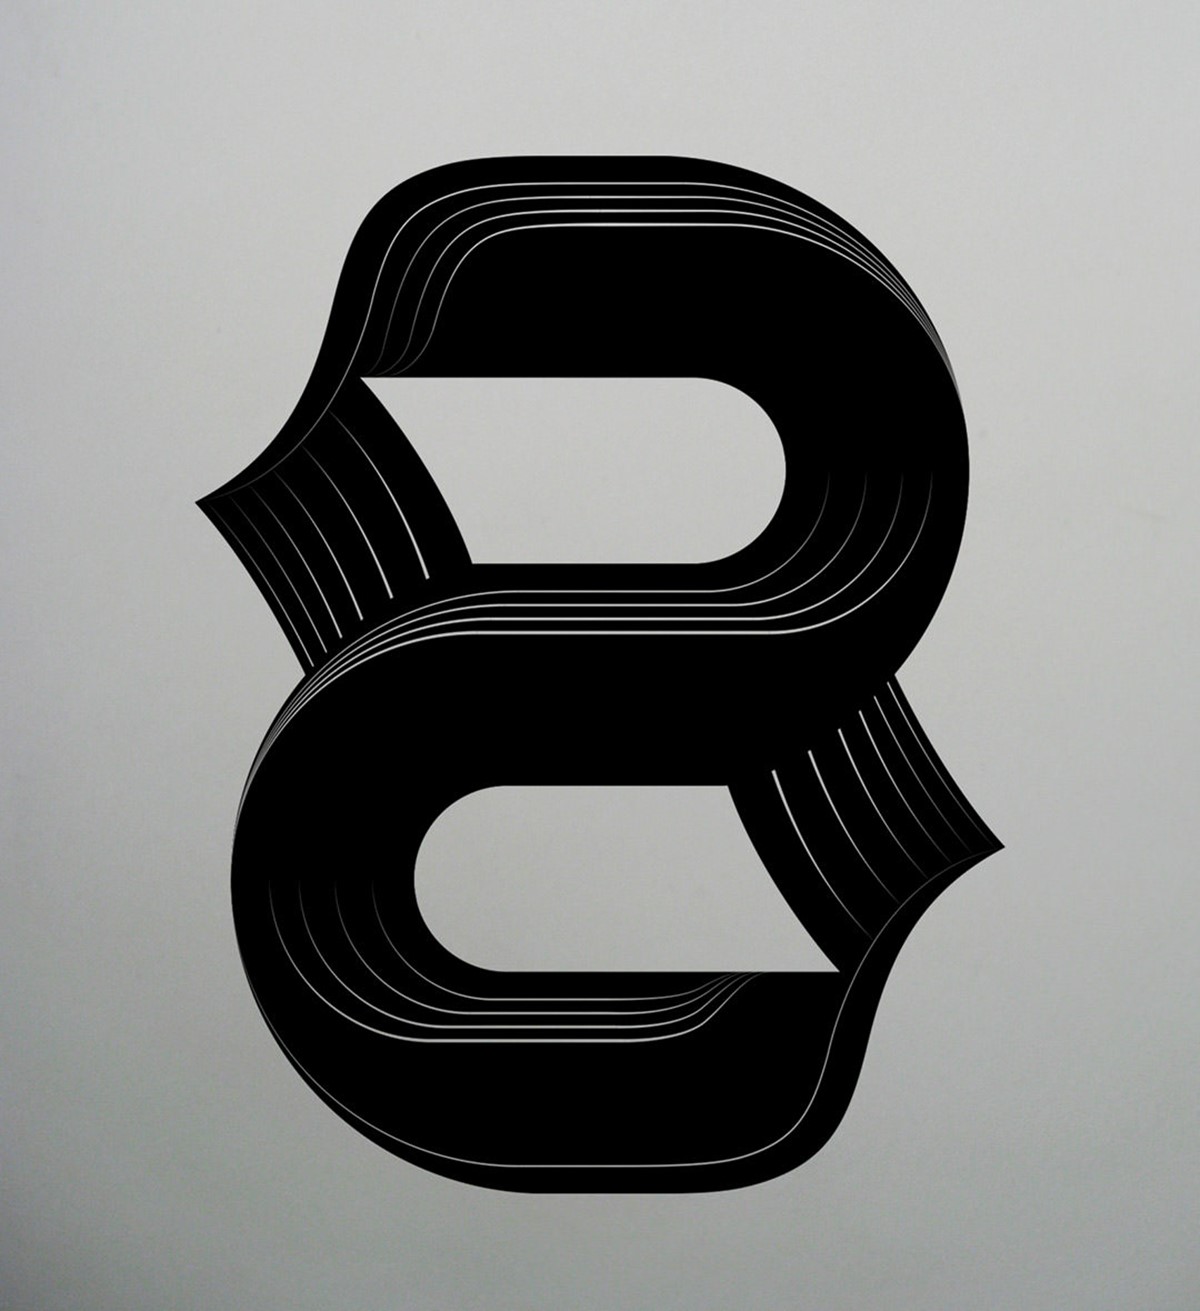 AIGA. Type Tuesday. BLT LTR Series. Typographic experiment: number 8. Design by Superfried.